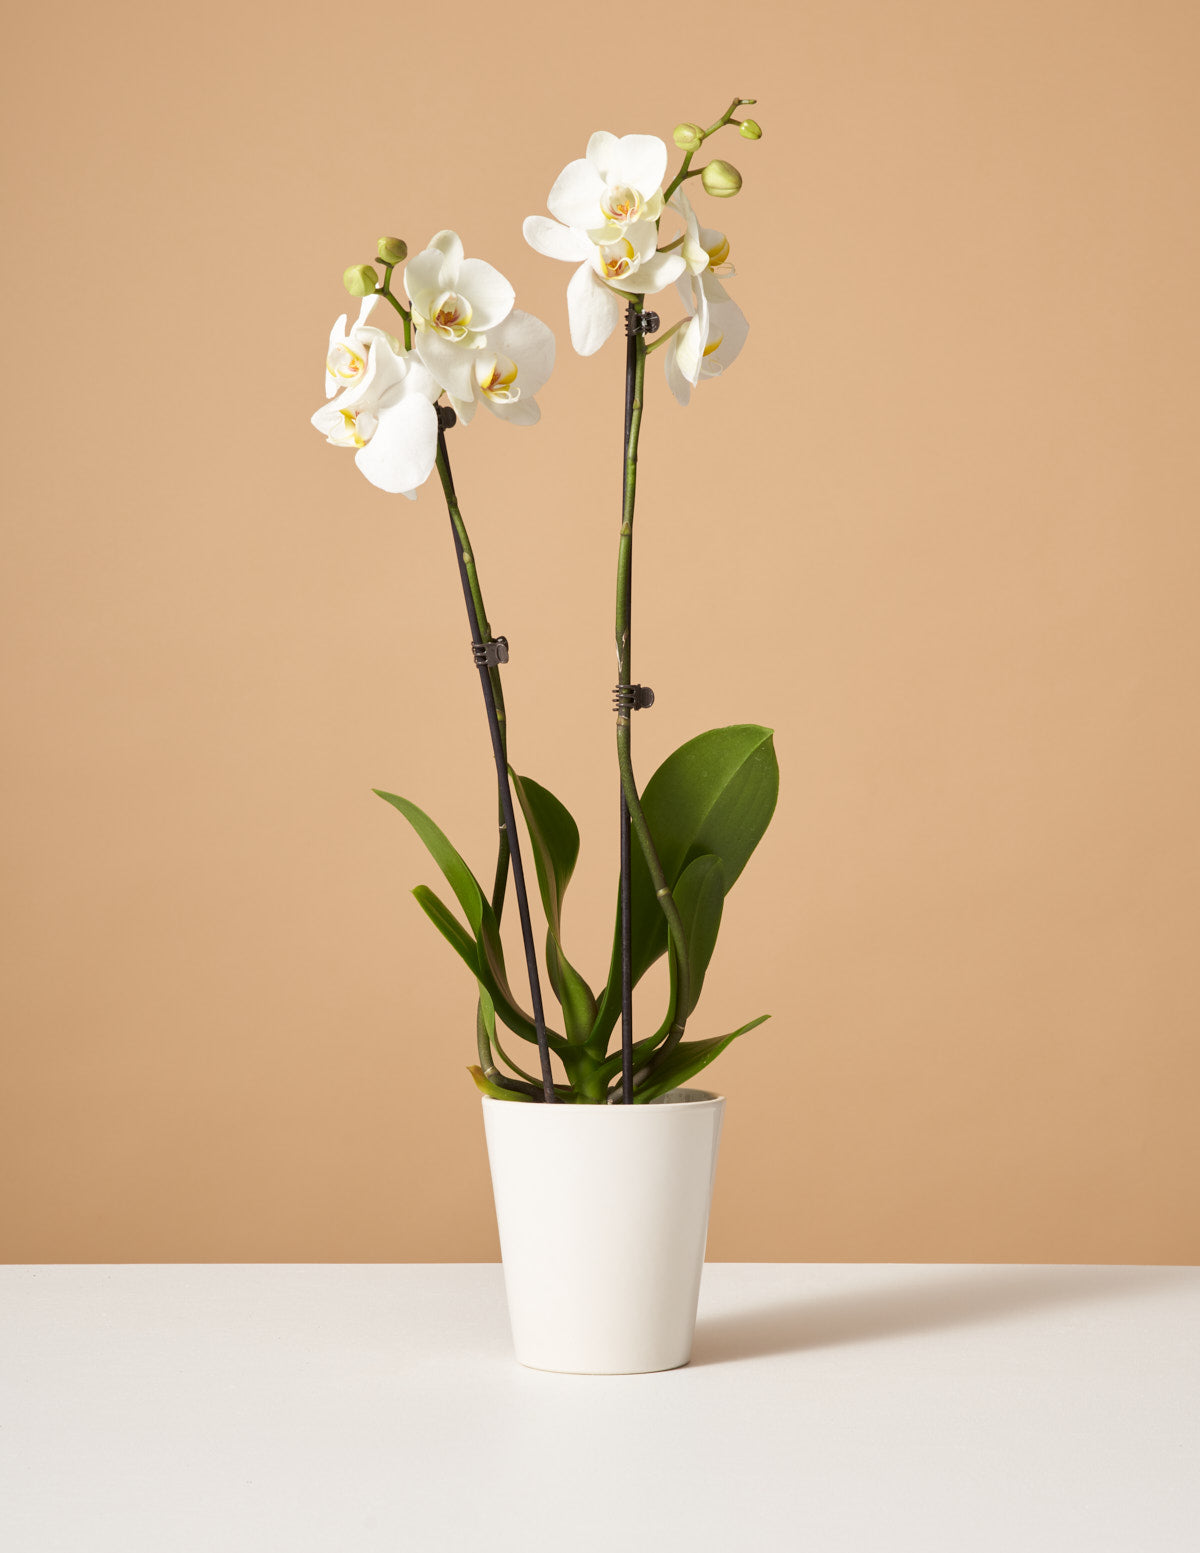 White Orchid Blooming Houseplant | Plants for Delivery | The Sill